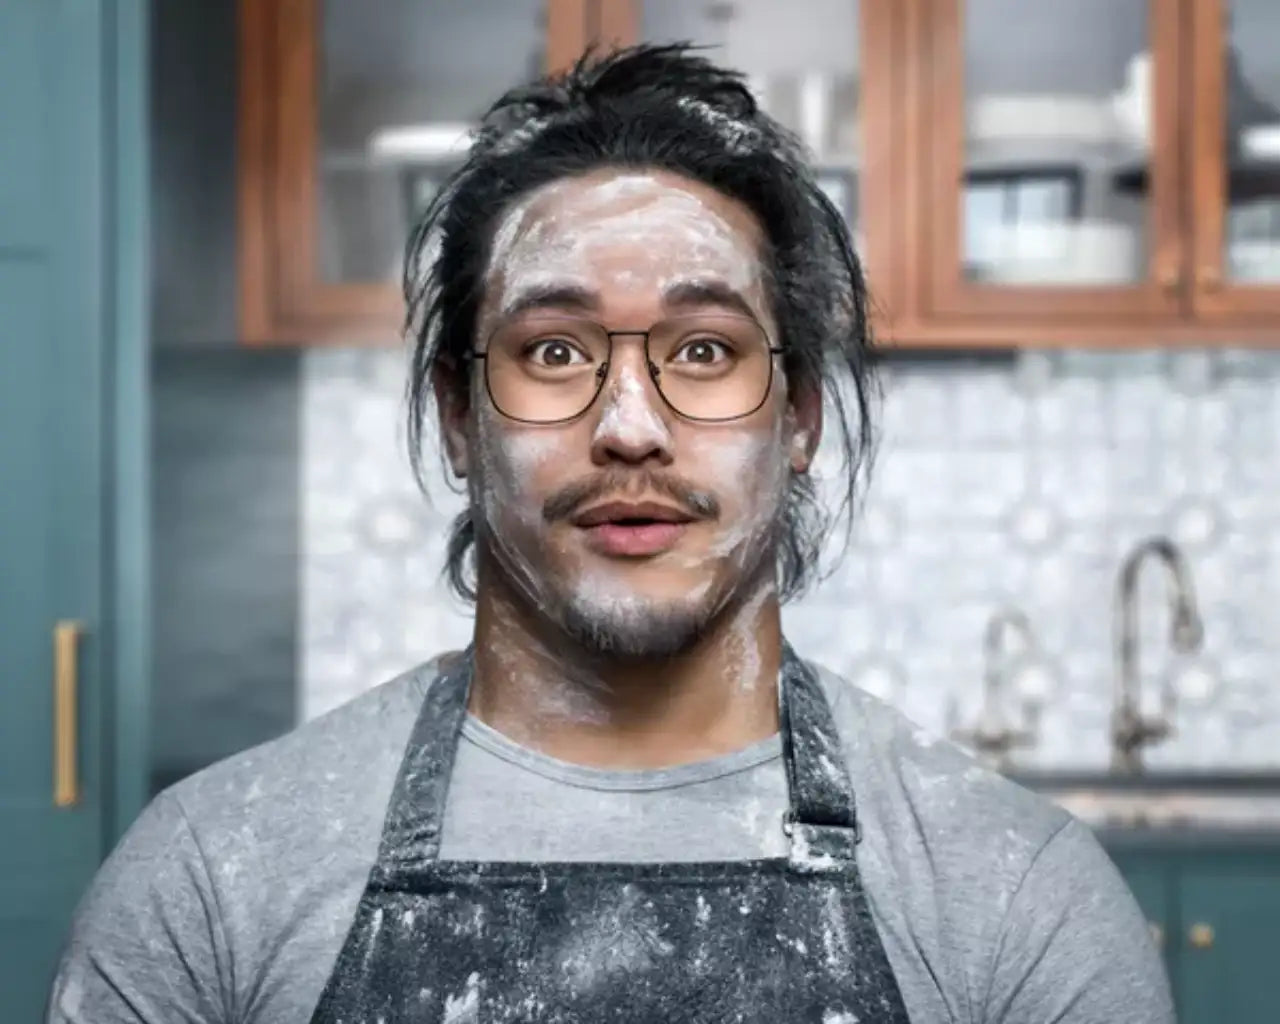 Man with clear lenses with flour on face showing clarity of Hoya eyeglass prescription lenses at The Optical Co